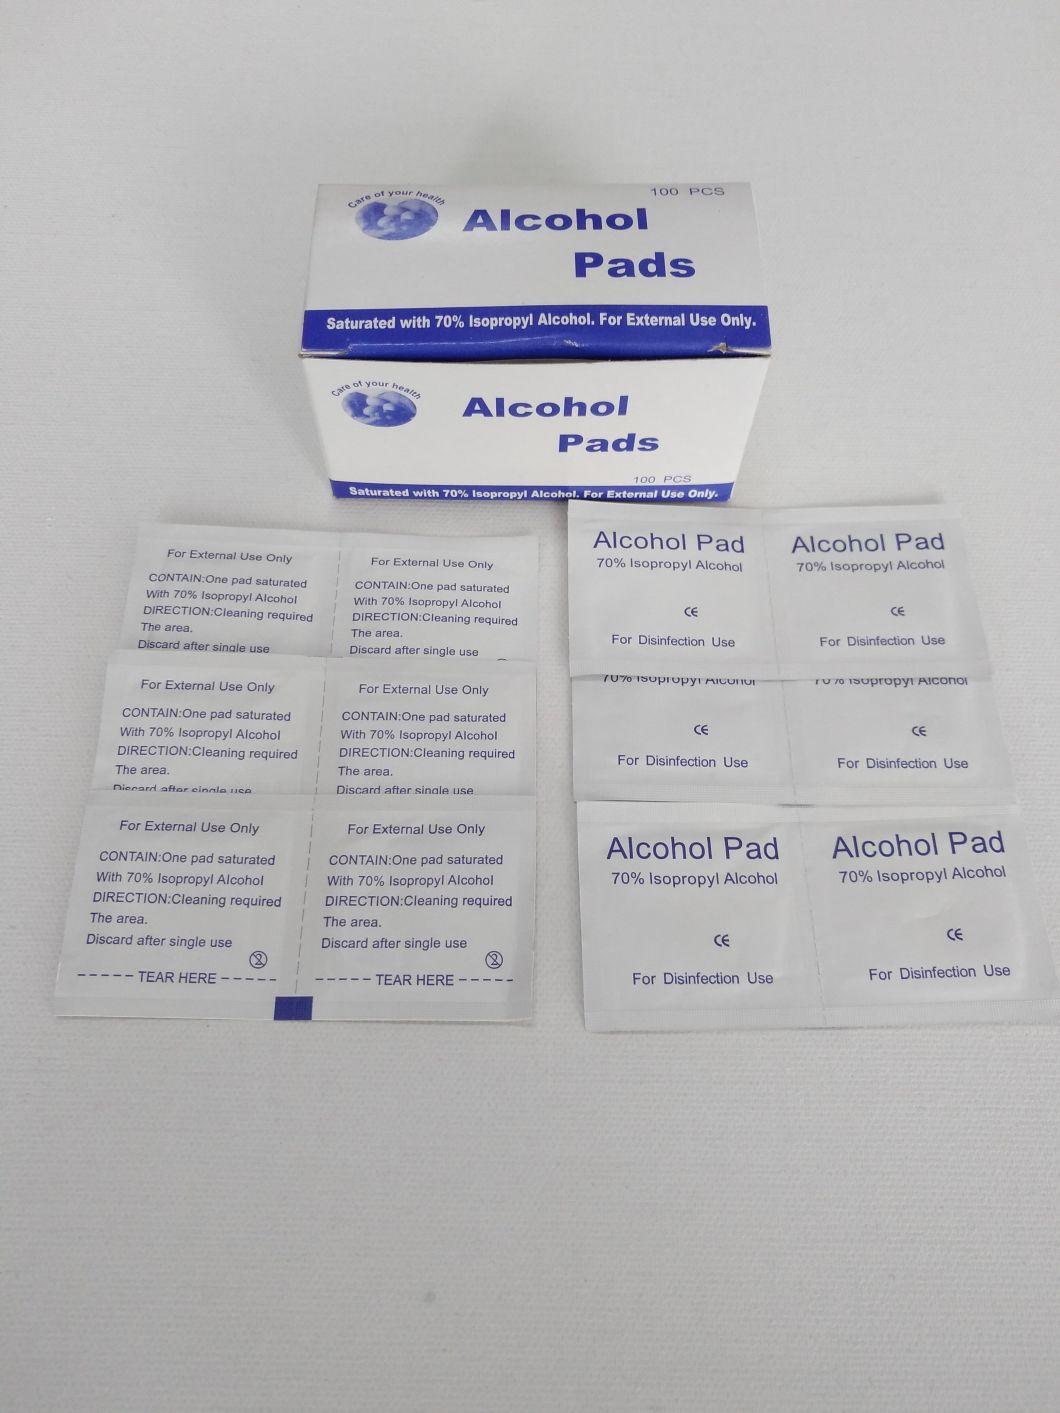 High Quality with Competitive Price Alcohol Swabs & Povidone-Iodine Prep Pads